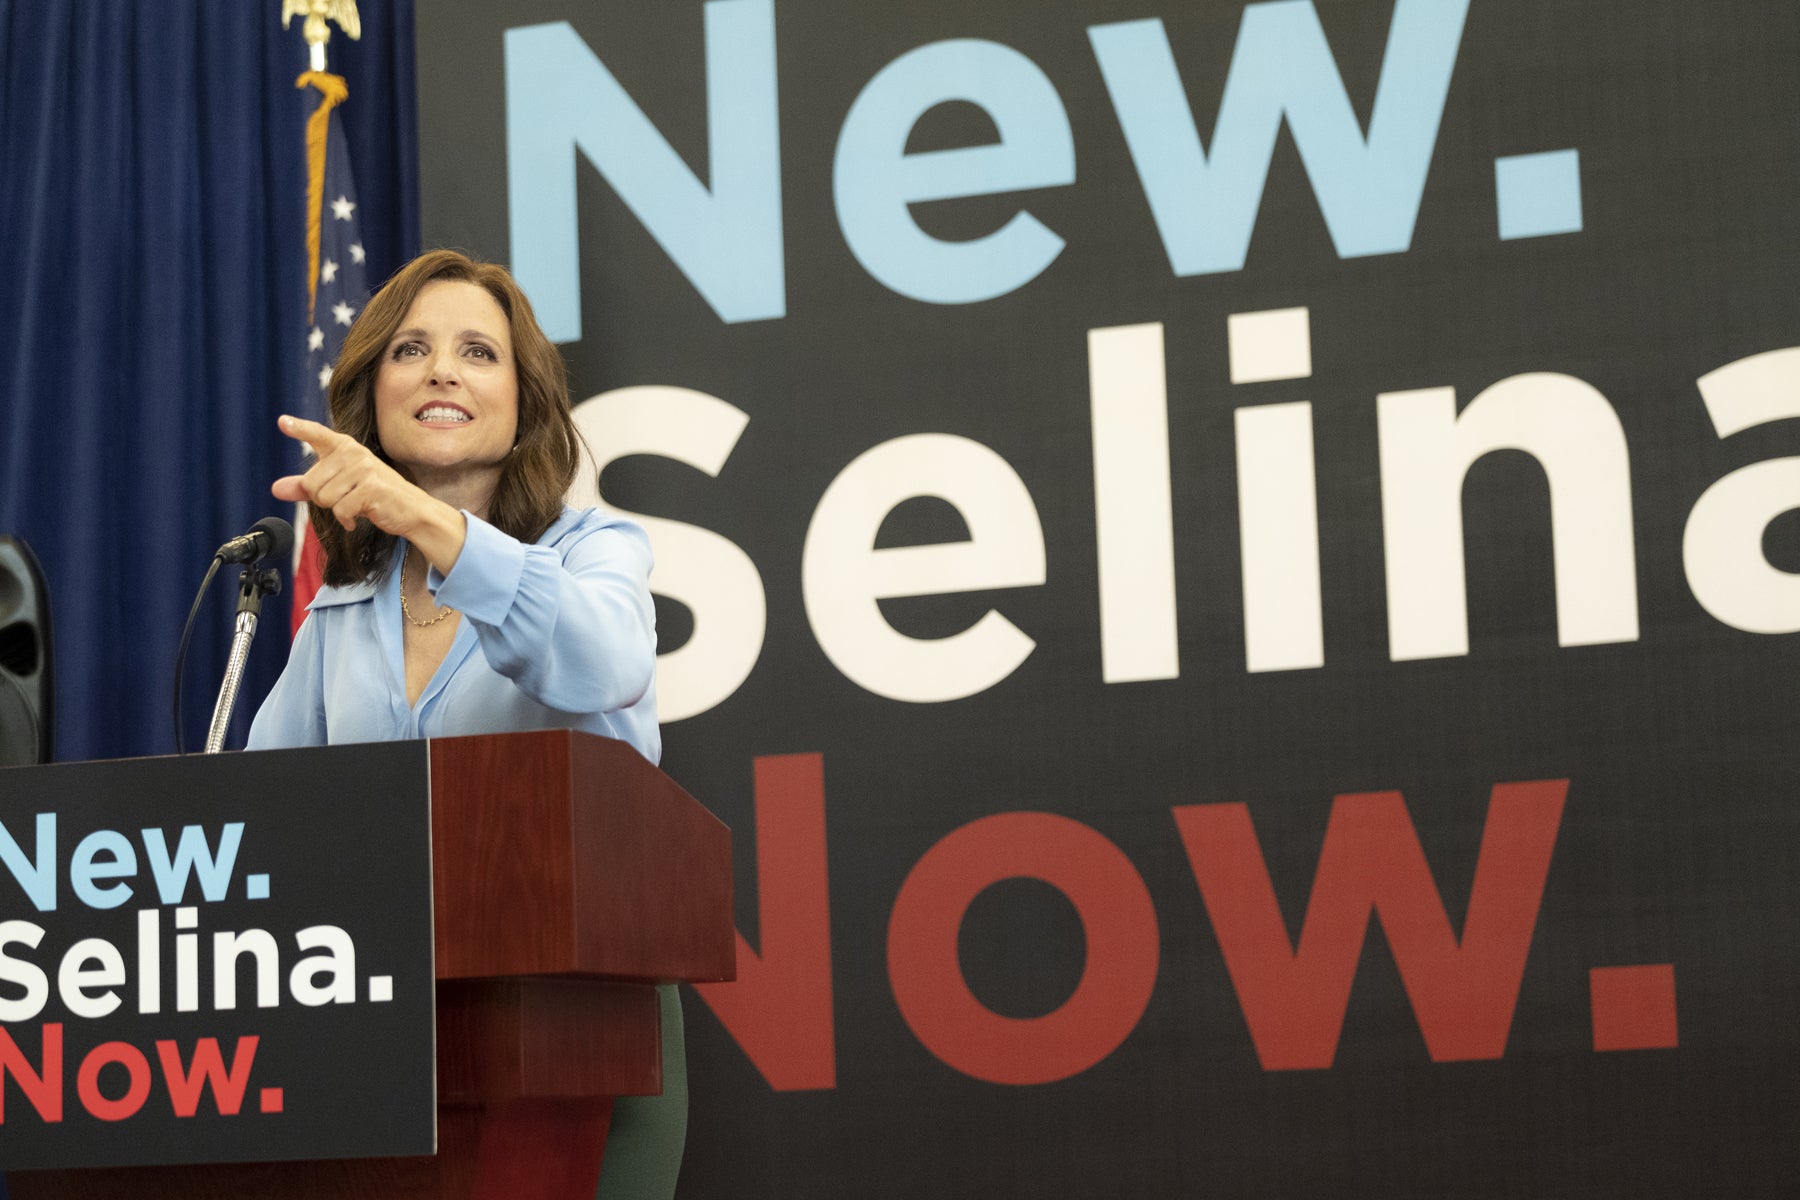 Selina unveils her “New. Selina. Now.” campaign slogan.